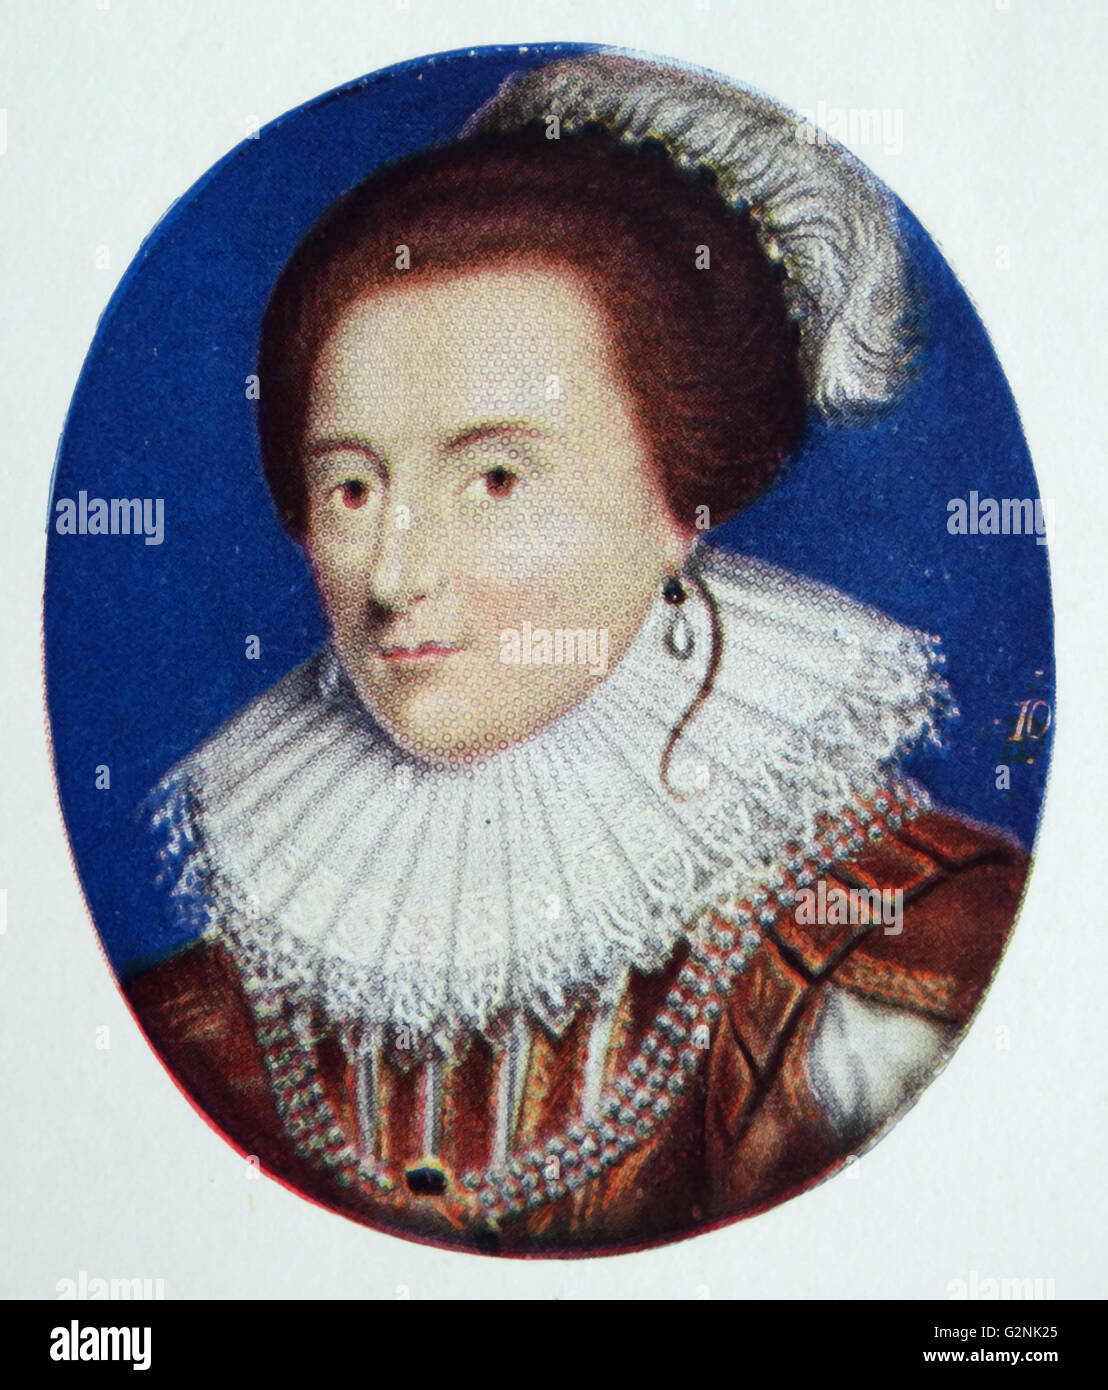 The Queen of Bohemia (1596-1662) . As the wife of Frederick V, Elizabeth Stuart was Electress Palatine and briefly Queen of Bohemia. She was a hugely powerful figure in her time. By Isaac Oliver (1565-1617) French born English portrait miniature painter. Stock Photo